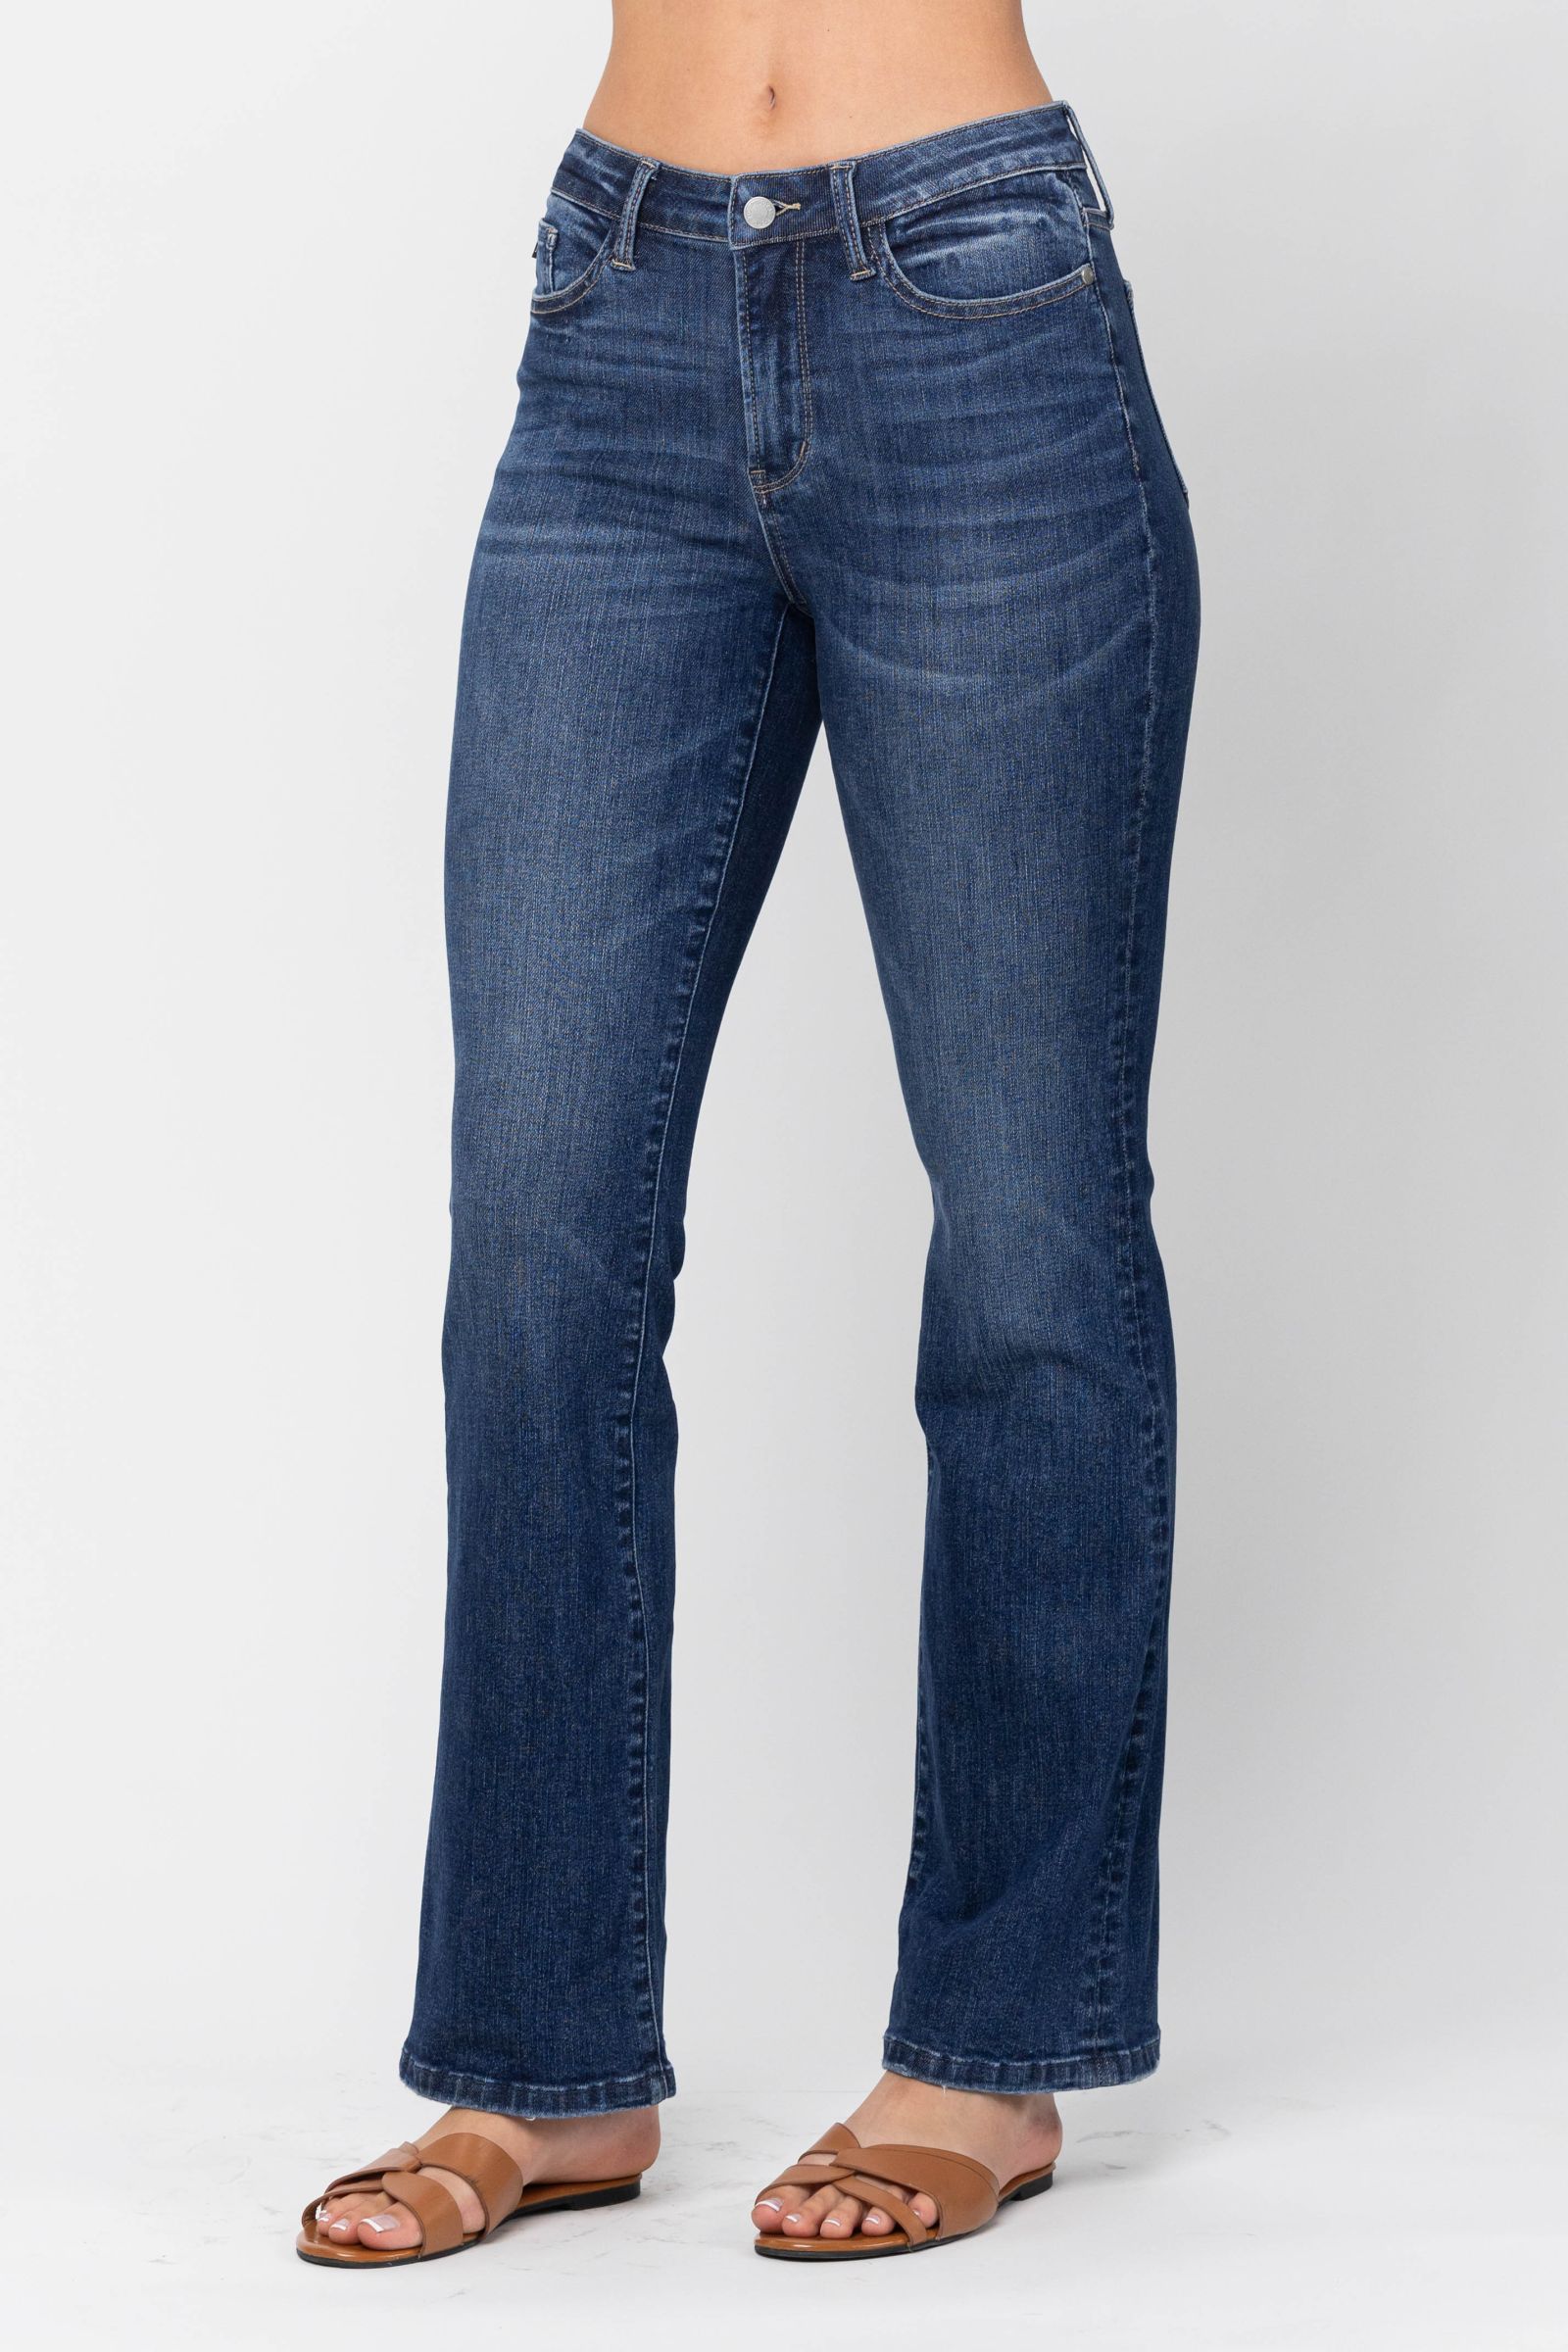 Judy Blue mid-rise classic non-distressed bootcut jeans  Ivy and Pearl Boutique   